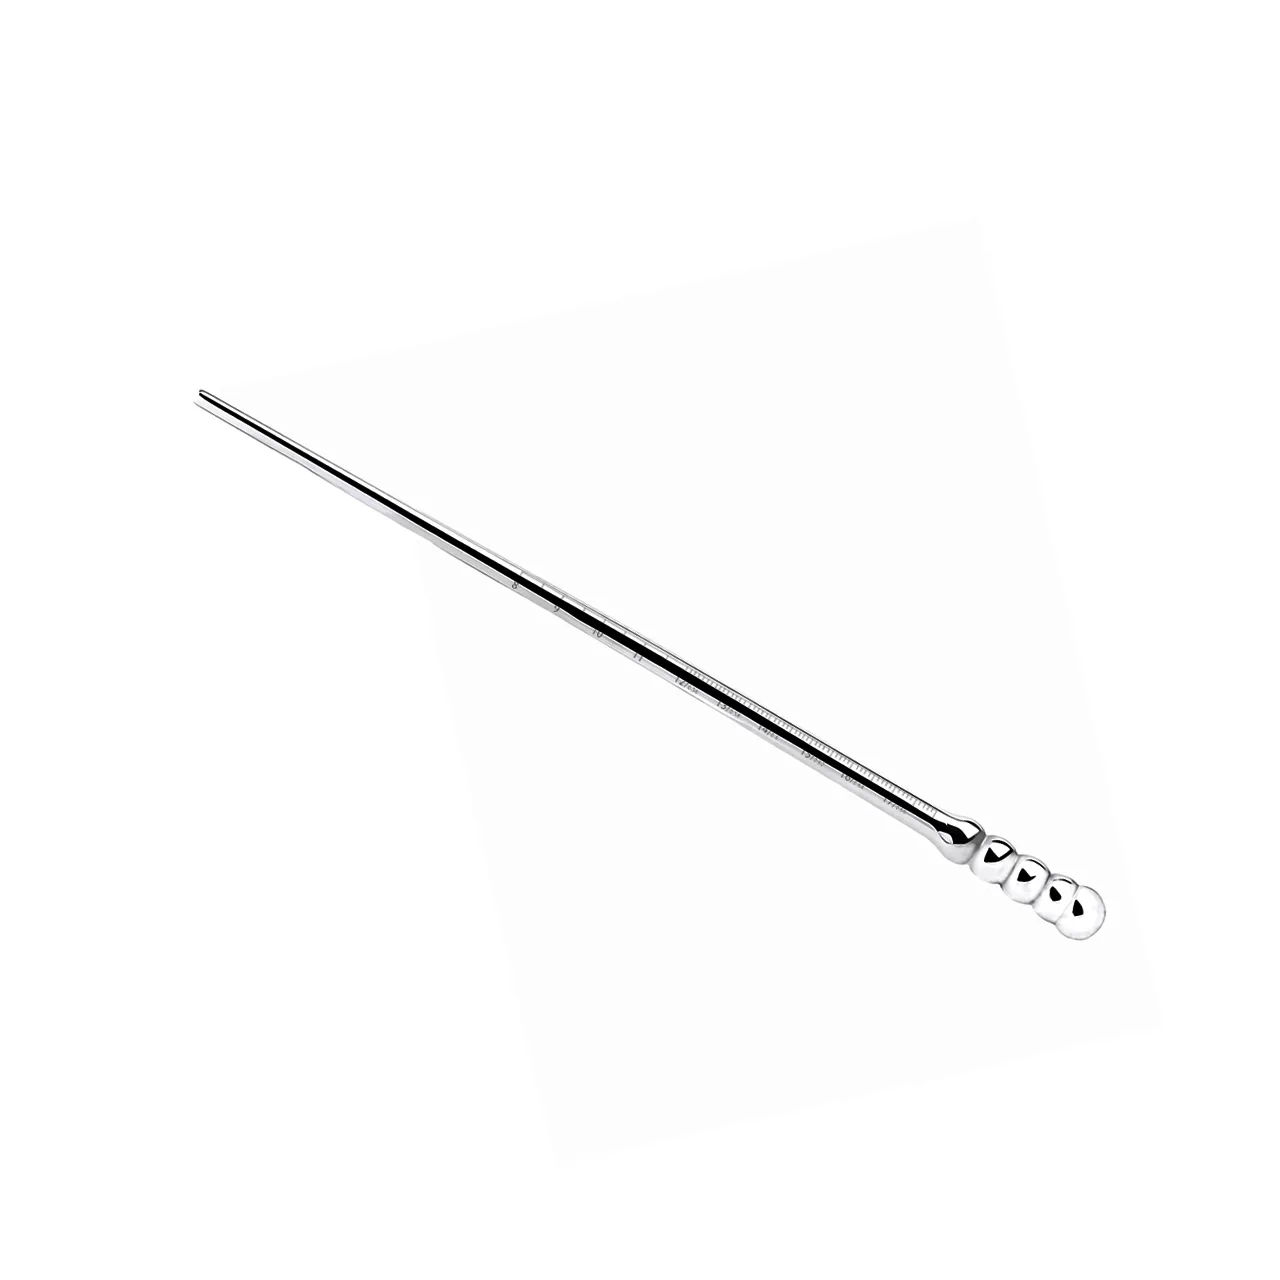 Dip Stick Wand Trainer 4 to 6 mm